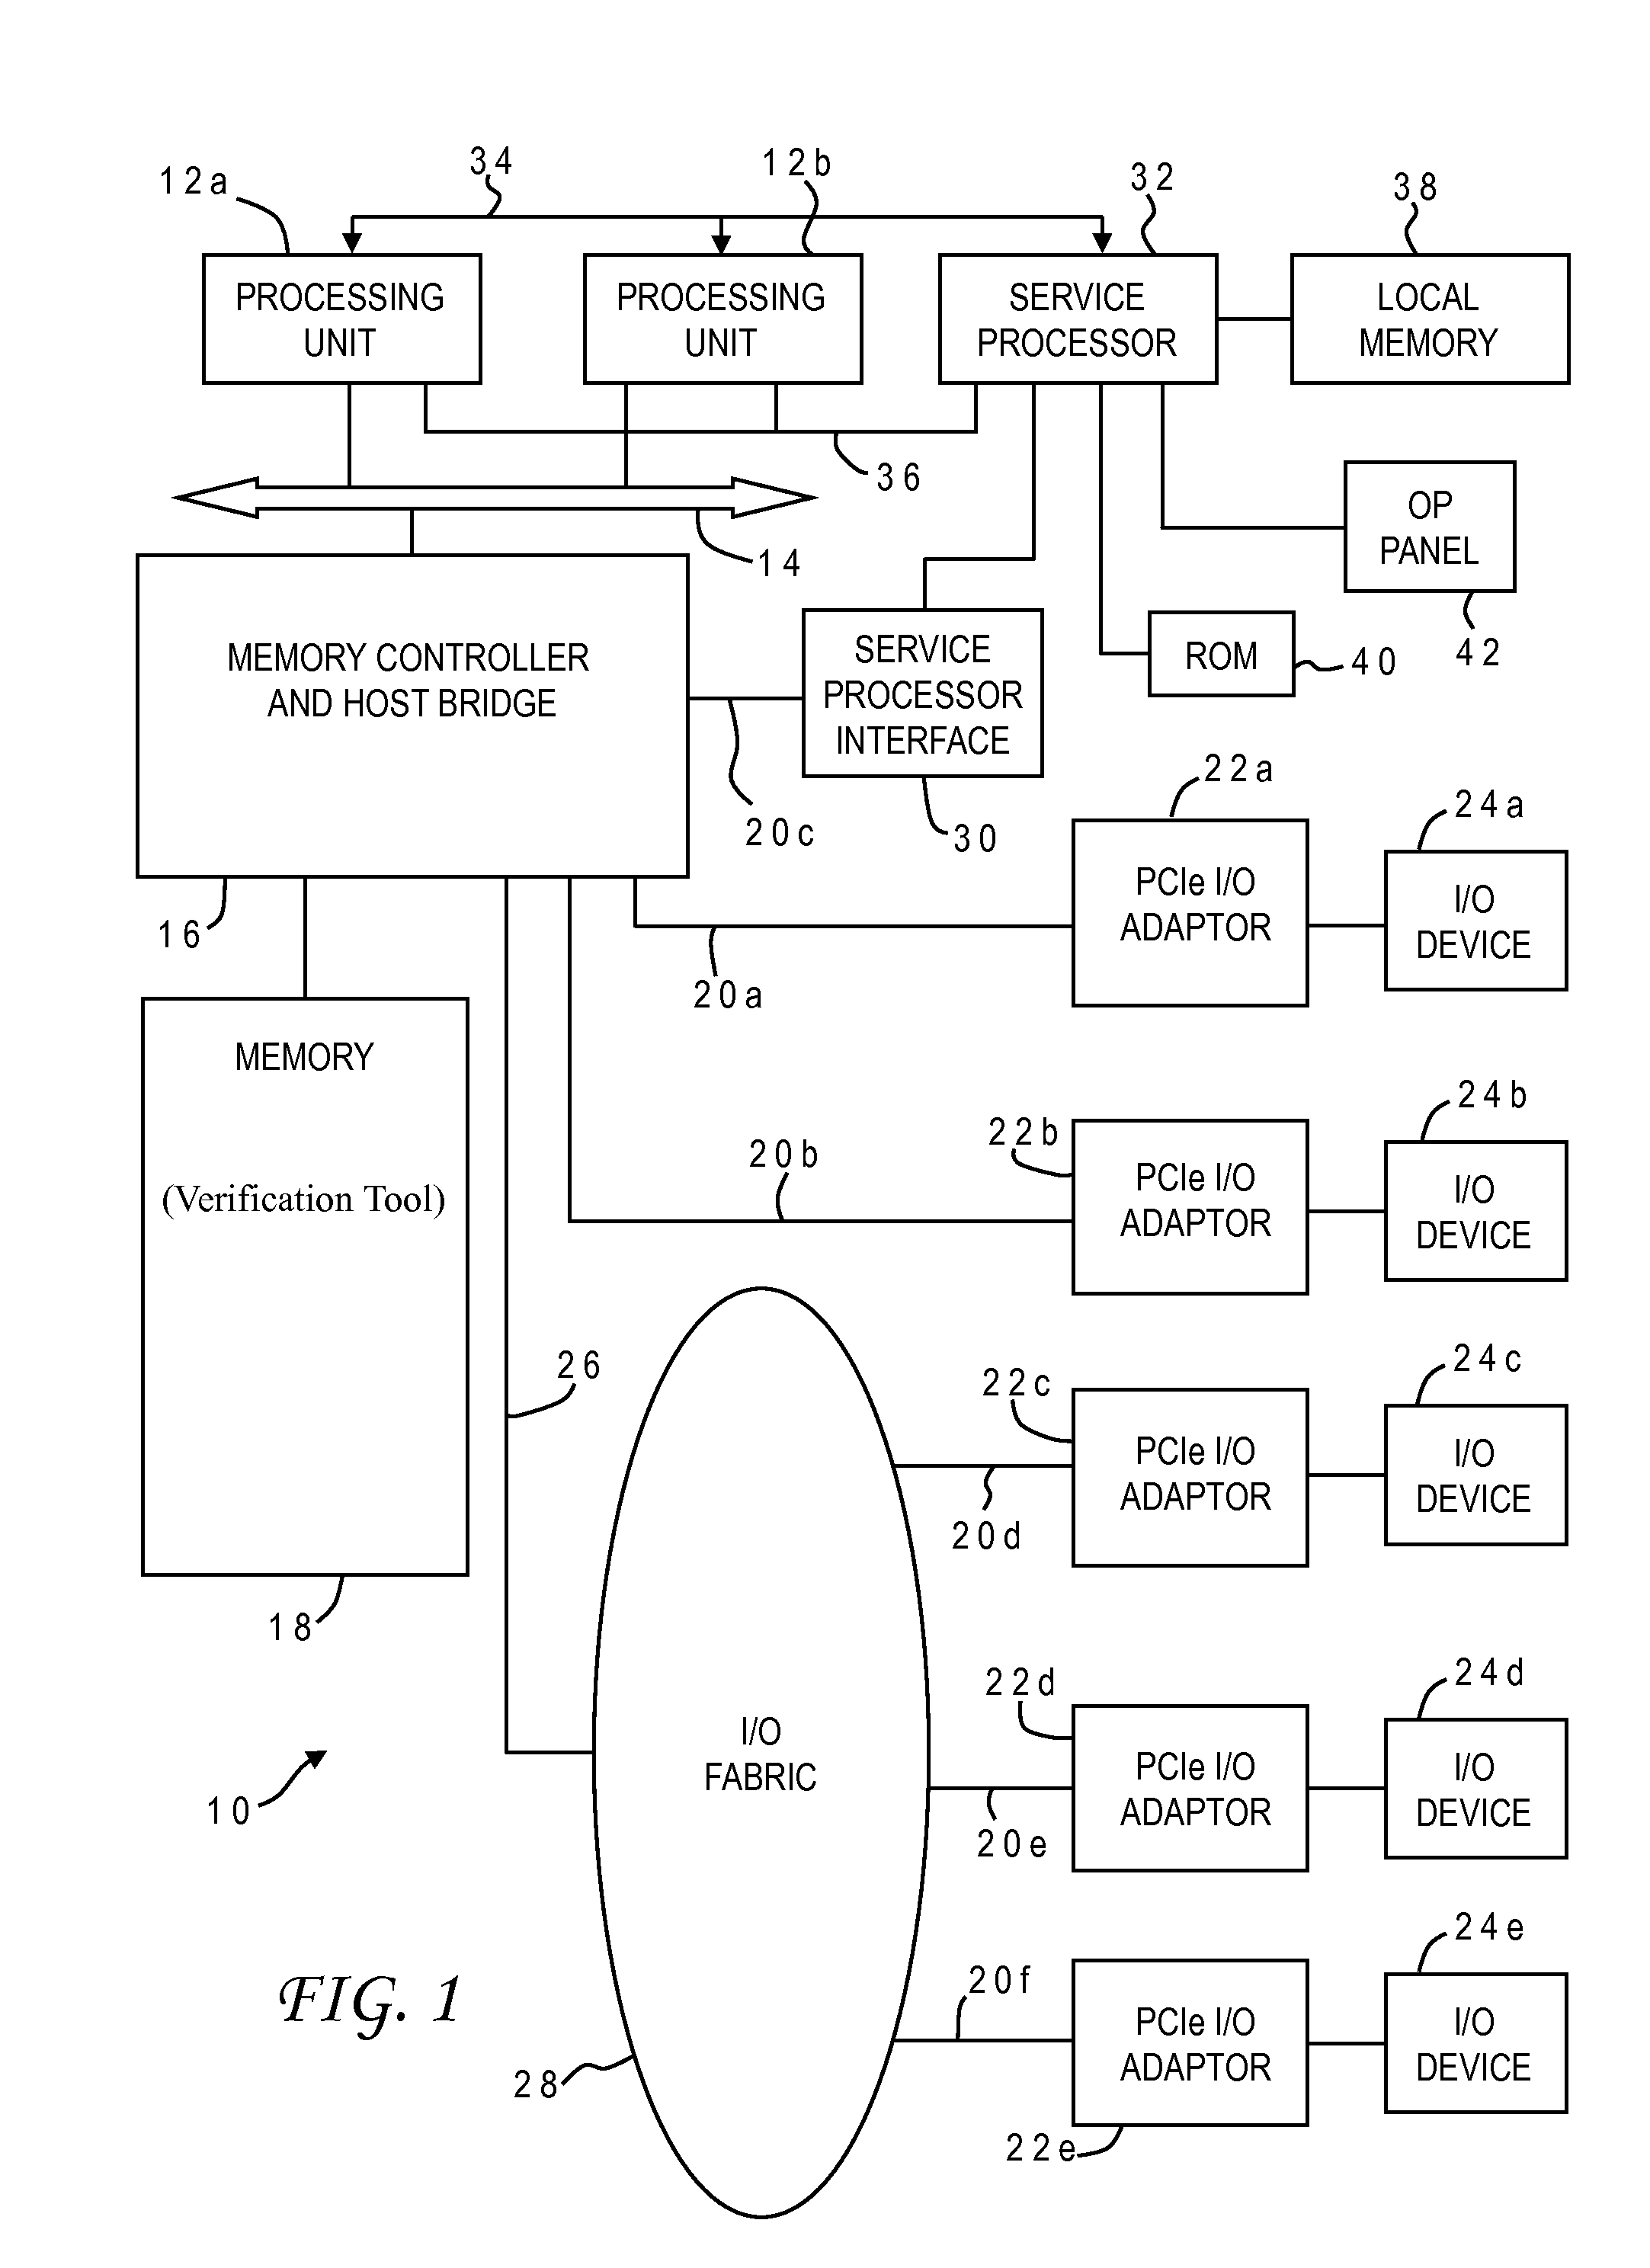 Efficient validation of coherency between processor cores and accelerators in computer systems